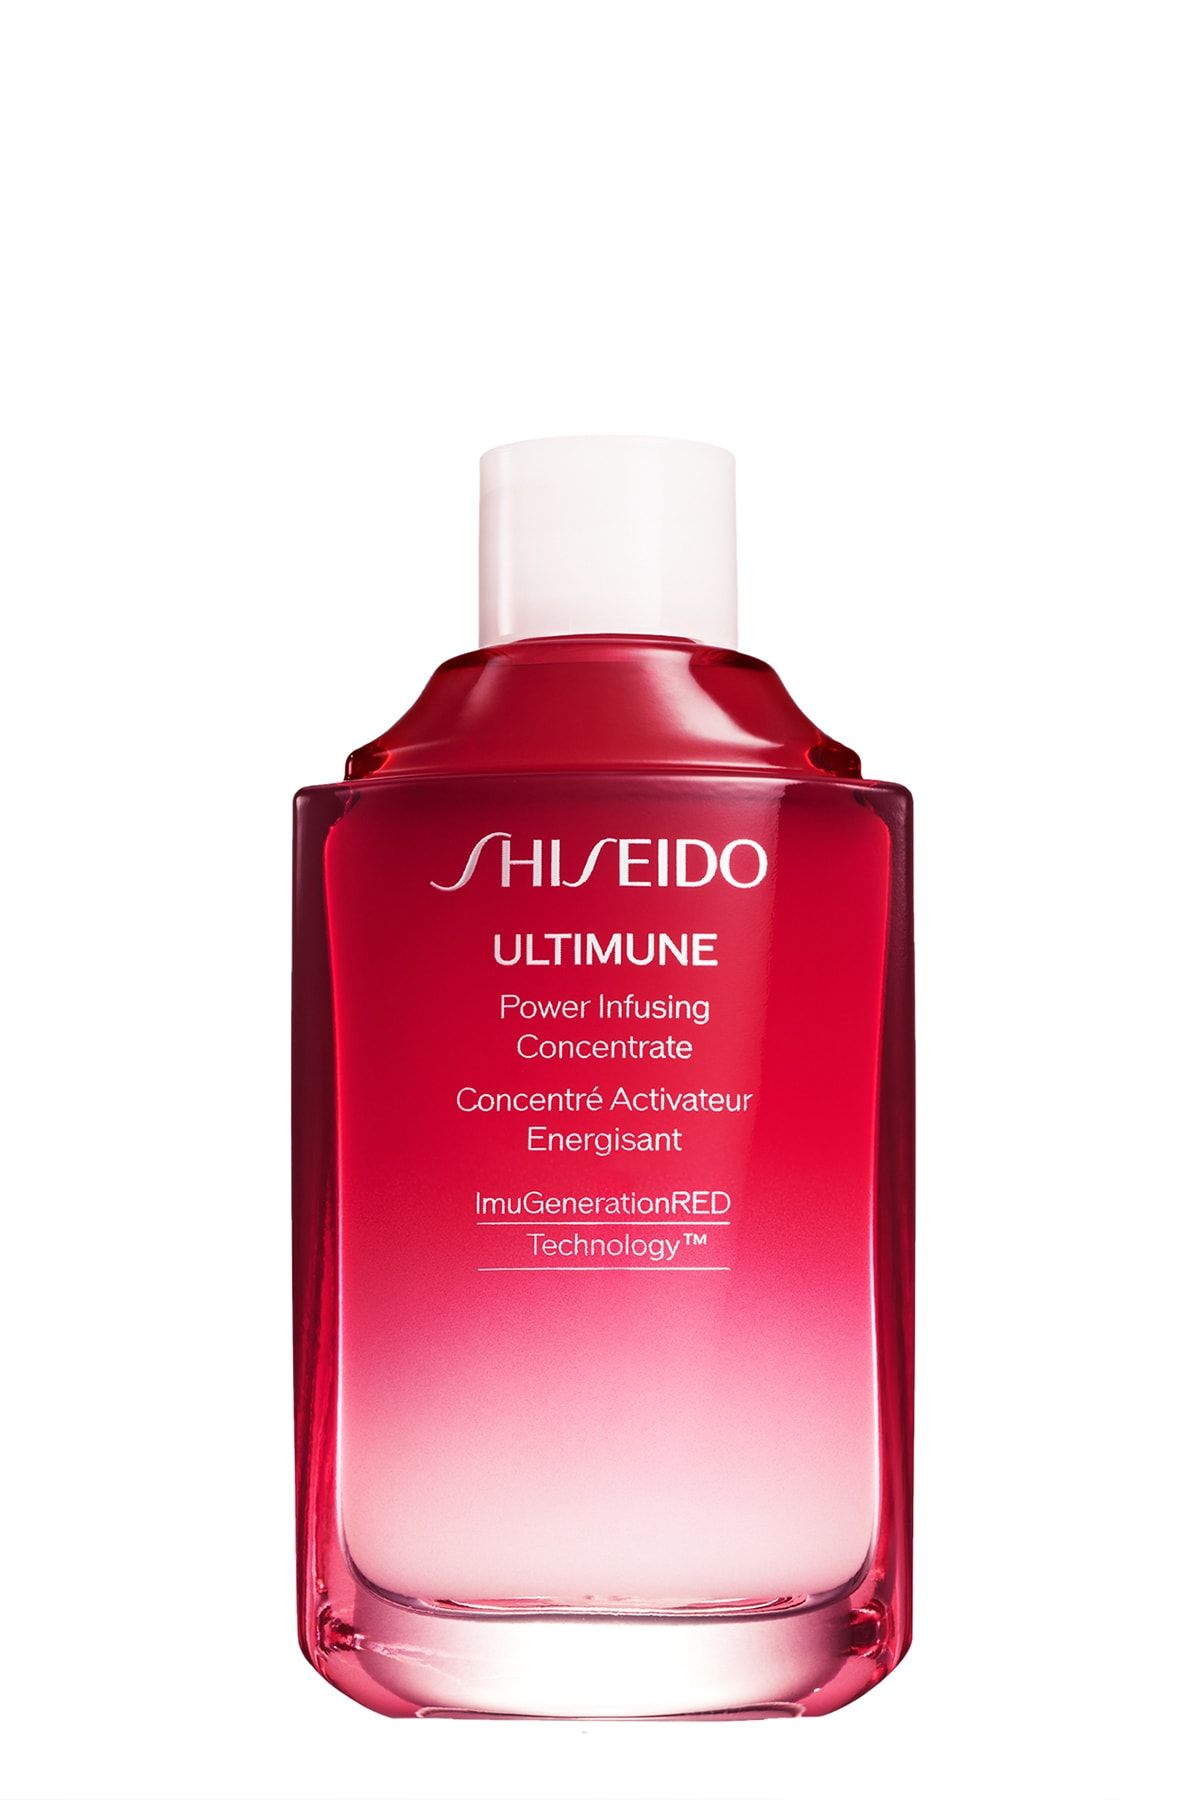 Shiseido Ultimune Power Infusing Concentrate 3.0 75ml Refill